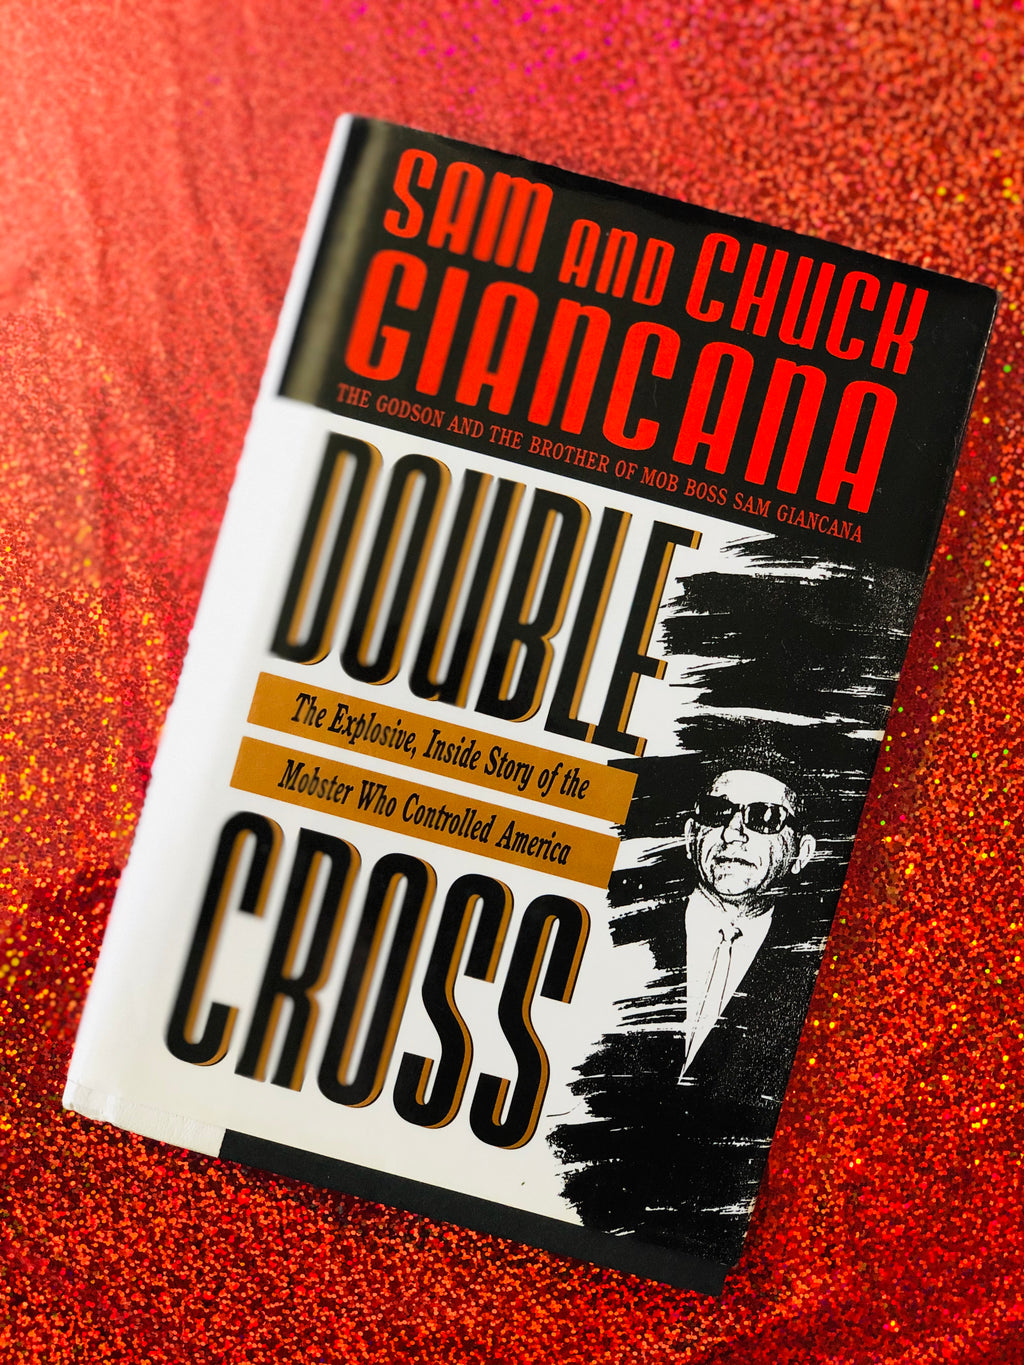 Double Cross- By Sam and Chuck Giancana